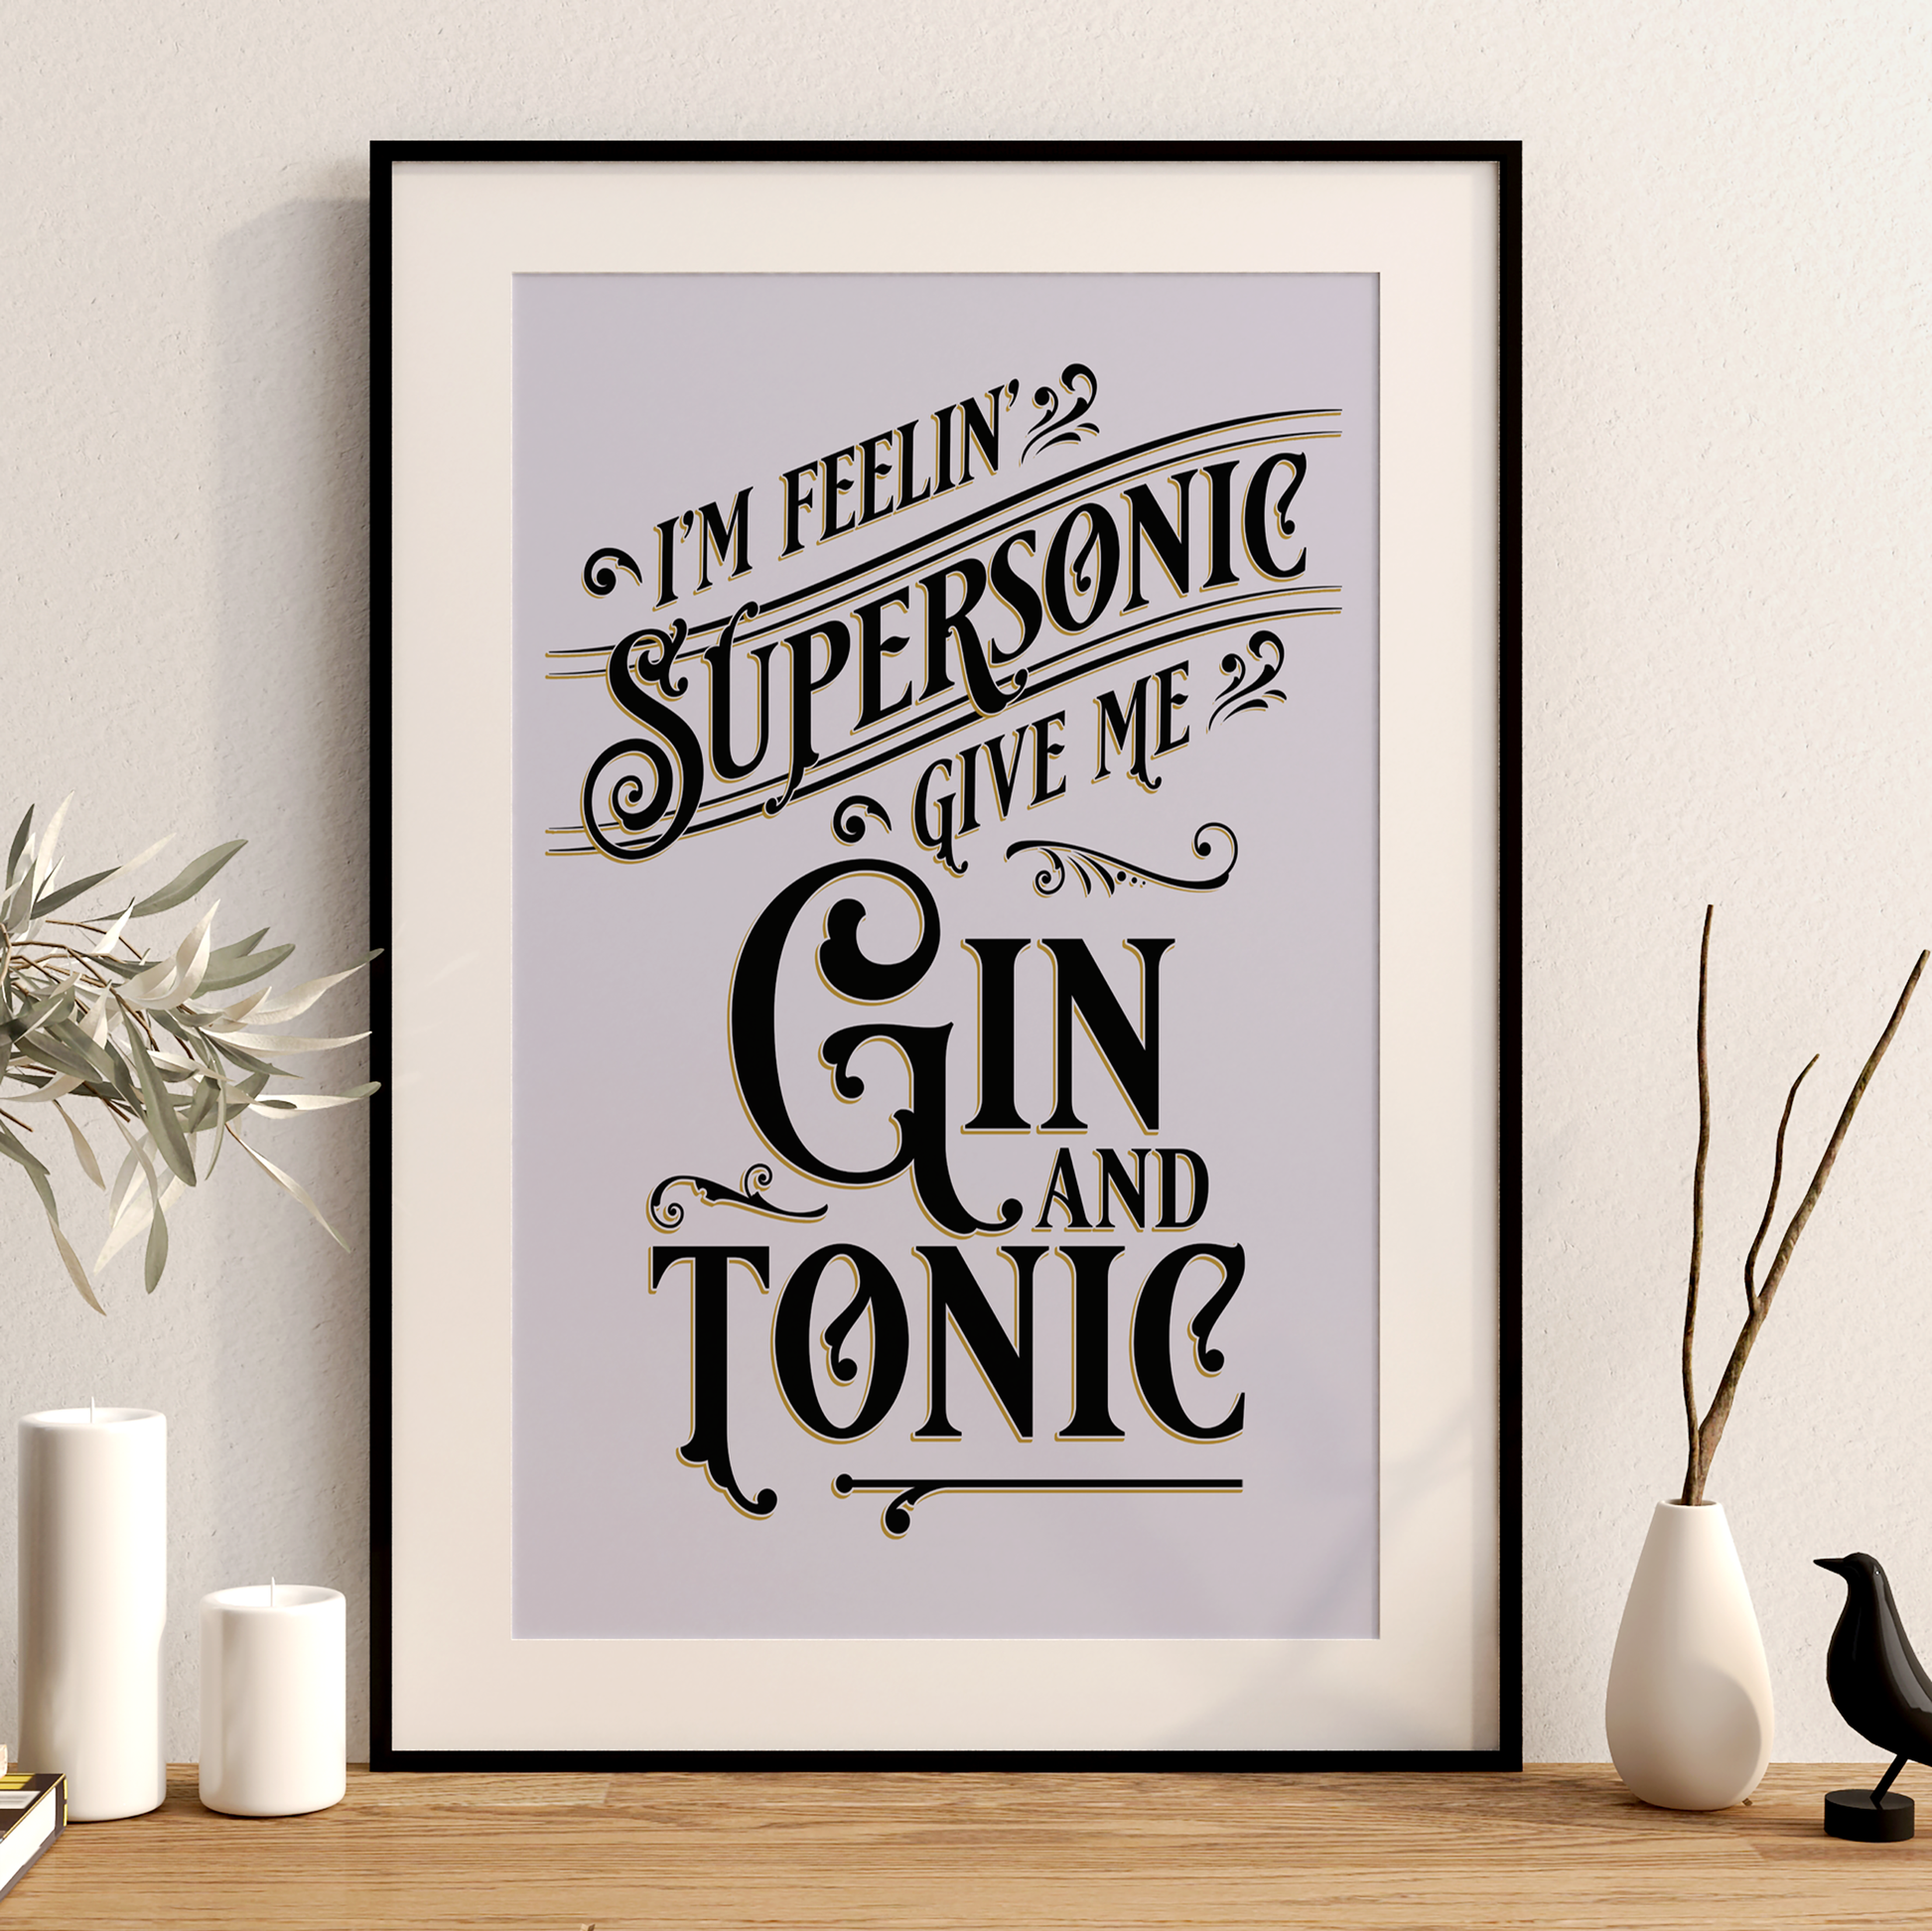 Oasis Supersonic Gin and Tonic Wall Art Poster Print